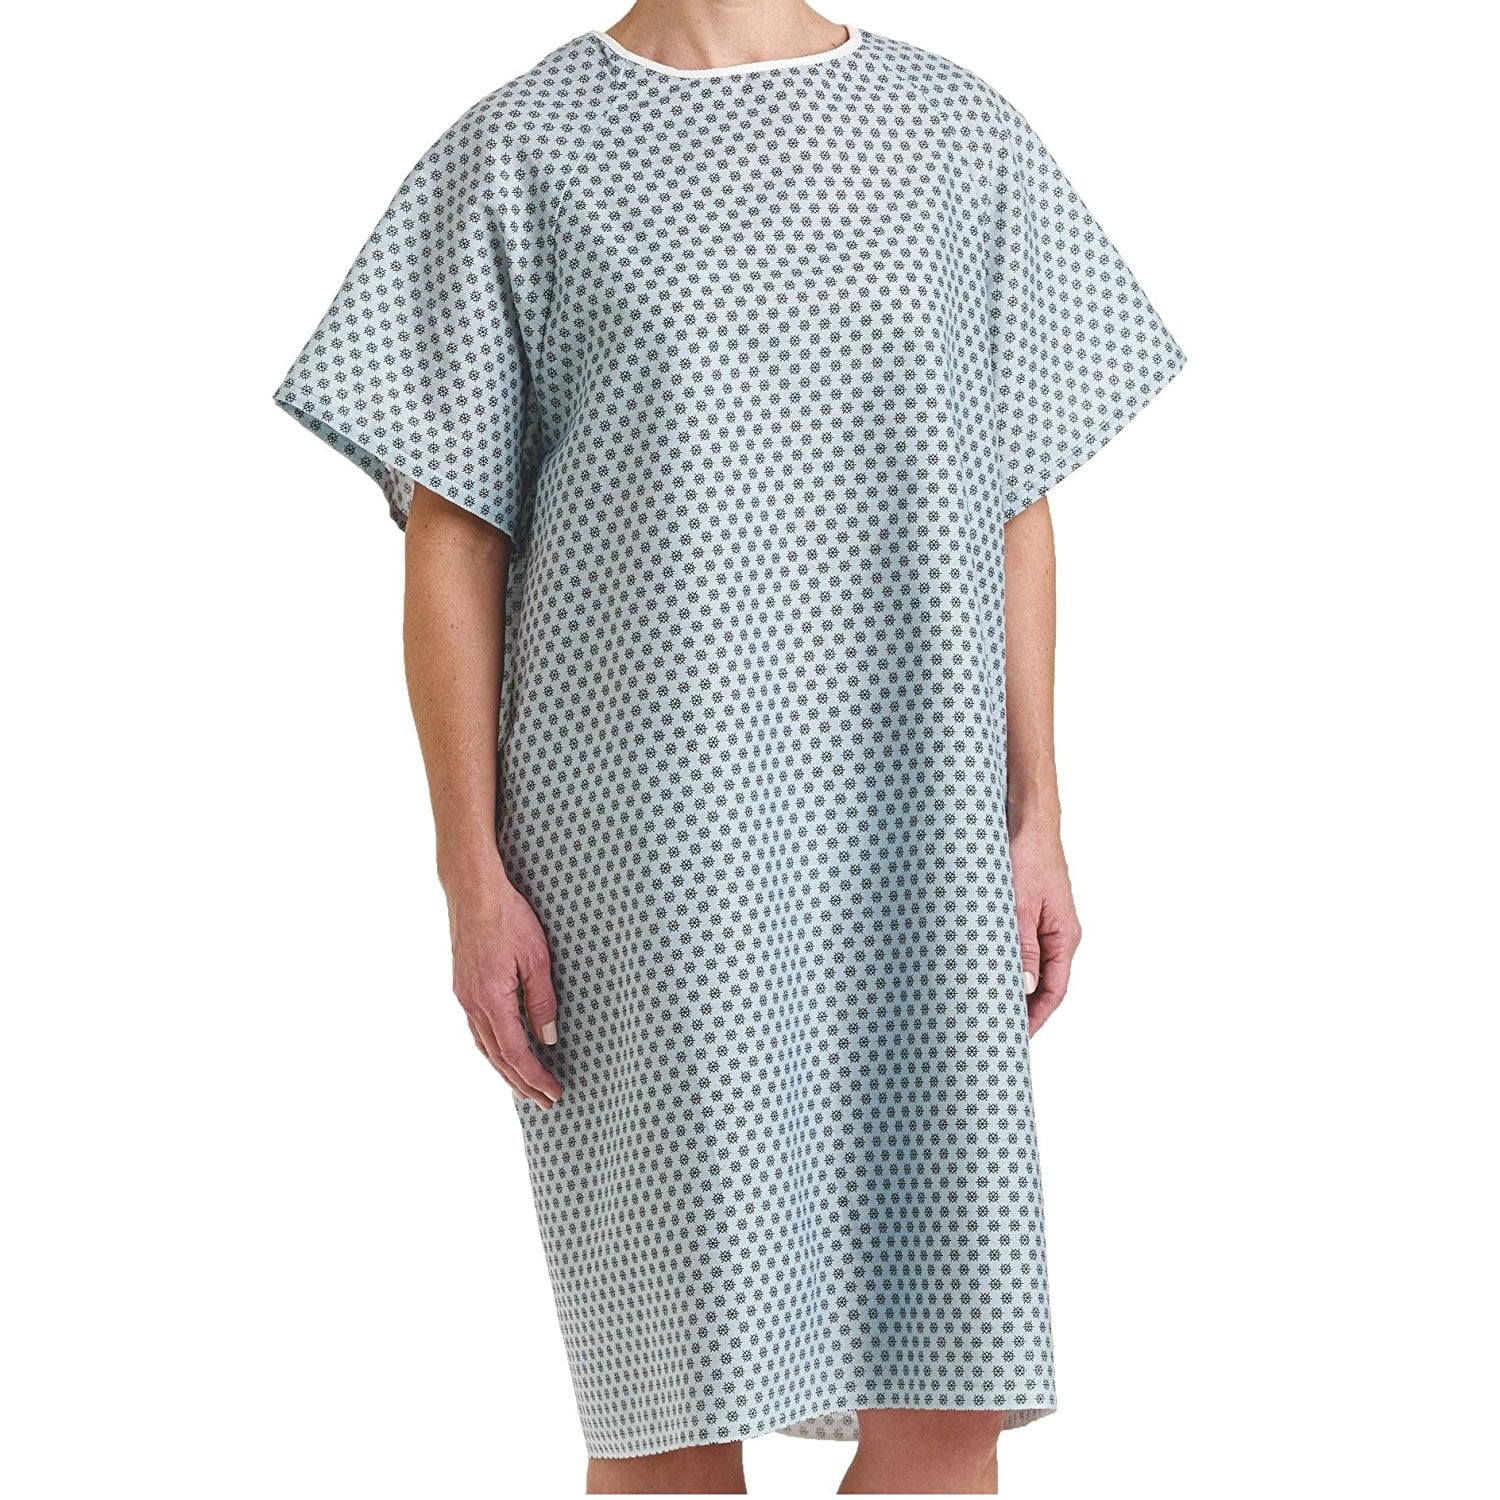 EZGOODZ Hospital Gowns for Women Open Back X-Large, Pack of 3 White Patient  Gowns with Back Tie, Half Sleeves, Reusable Cotton Hospital Gown  Knee-Length Unisex, Medical Patient Gowns for Hospitals - Walmart.com